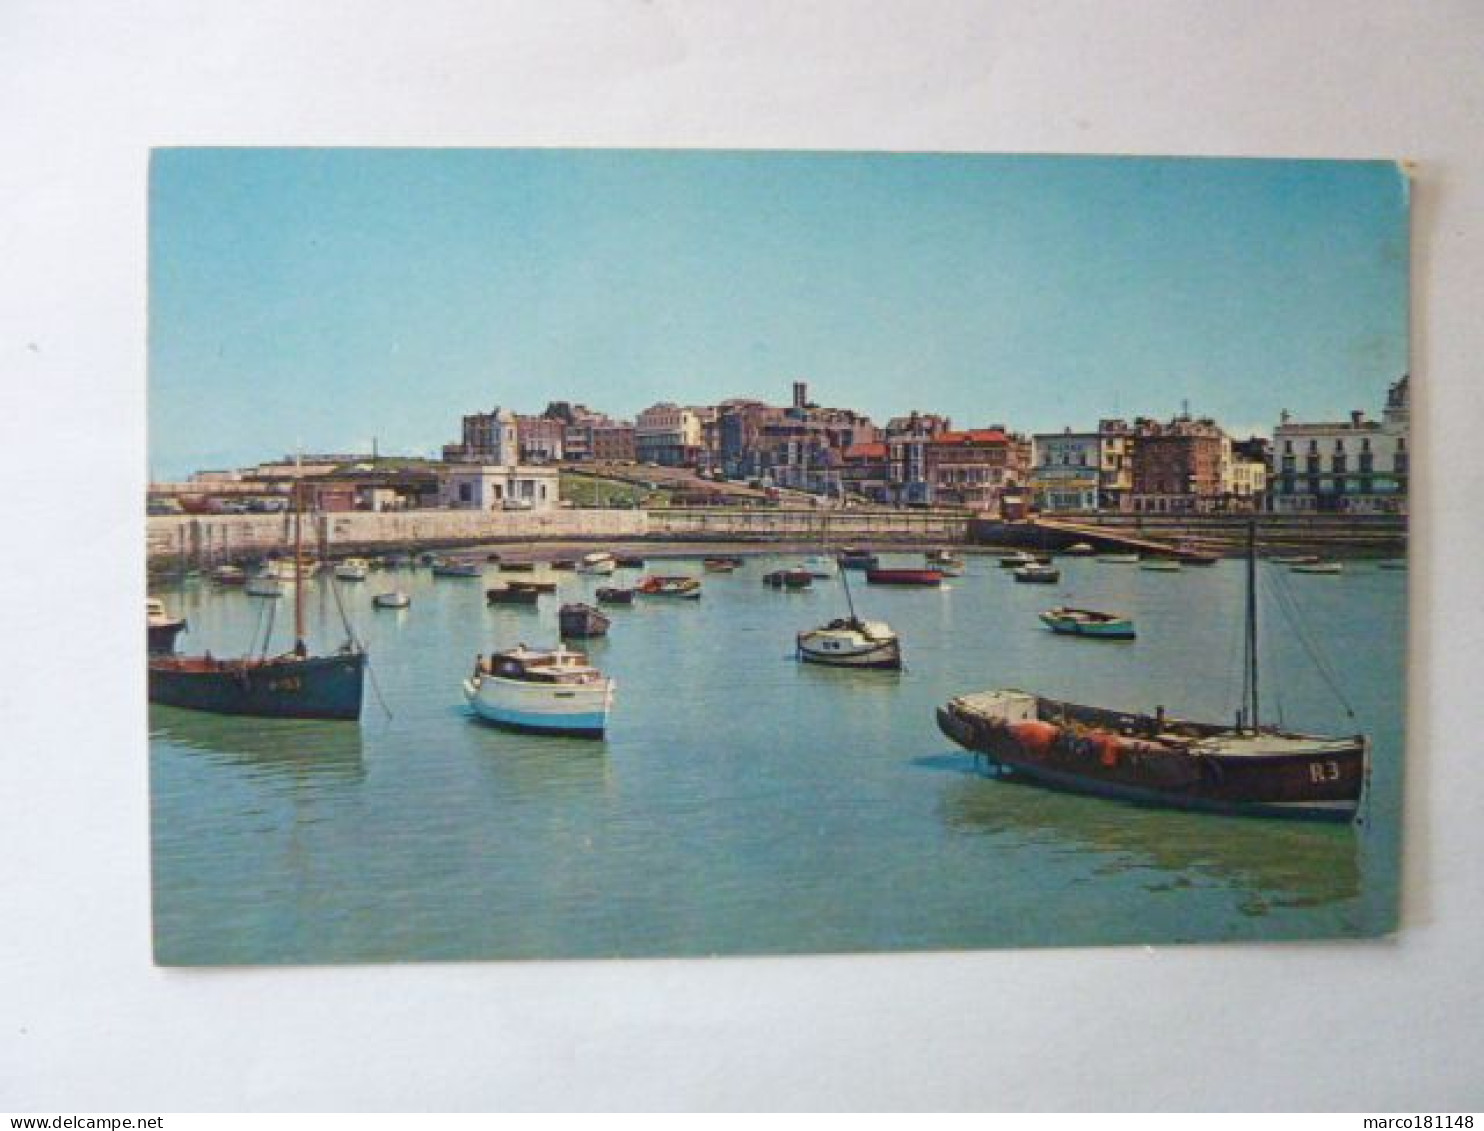 The Harbour - MARGATE - A Popular Ressort On Thr Isle Of Thanet - Margate